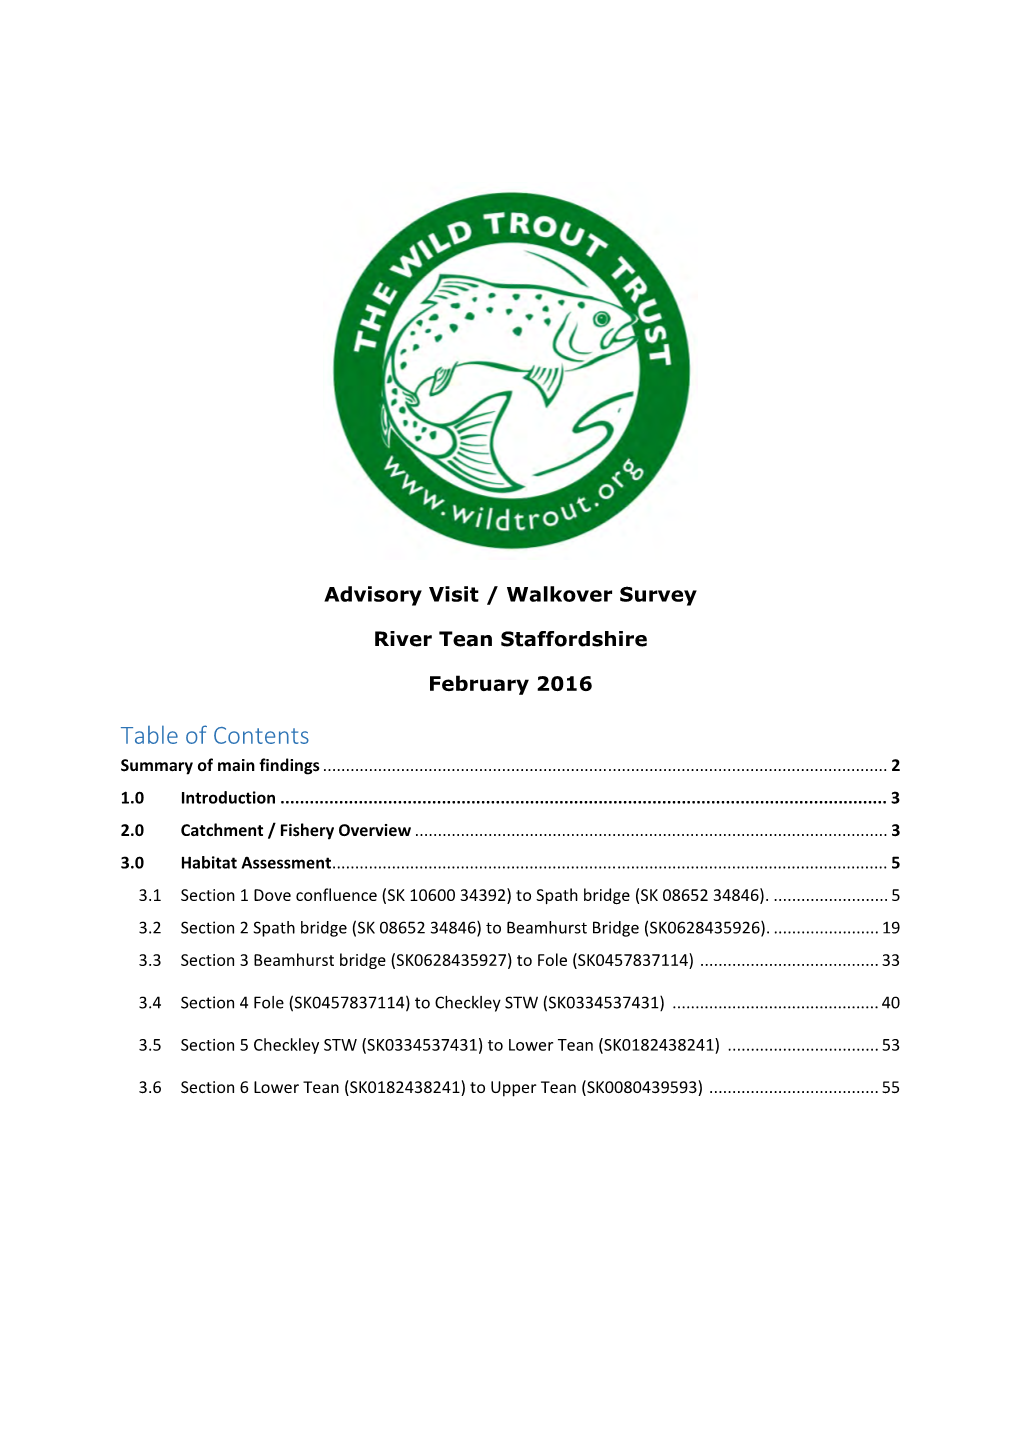 Table of Contents Summary of Main Findings